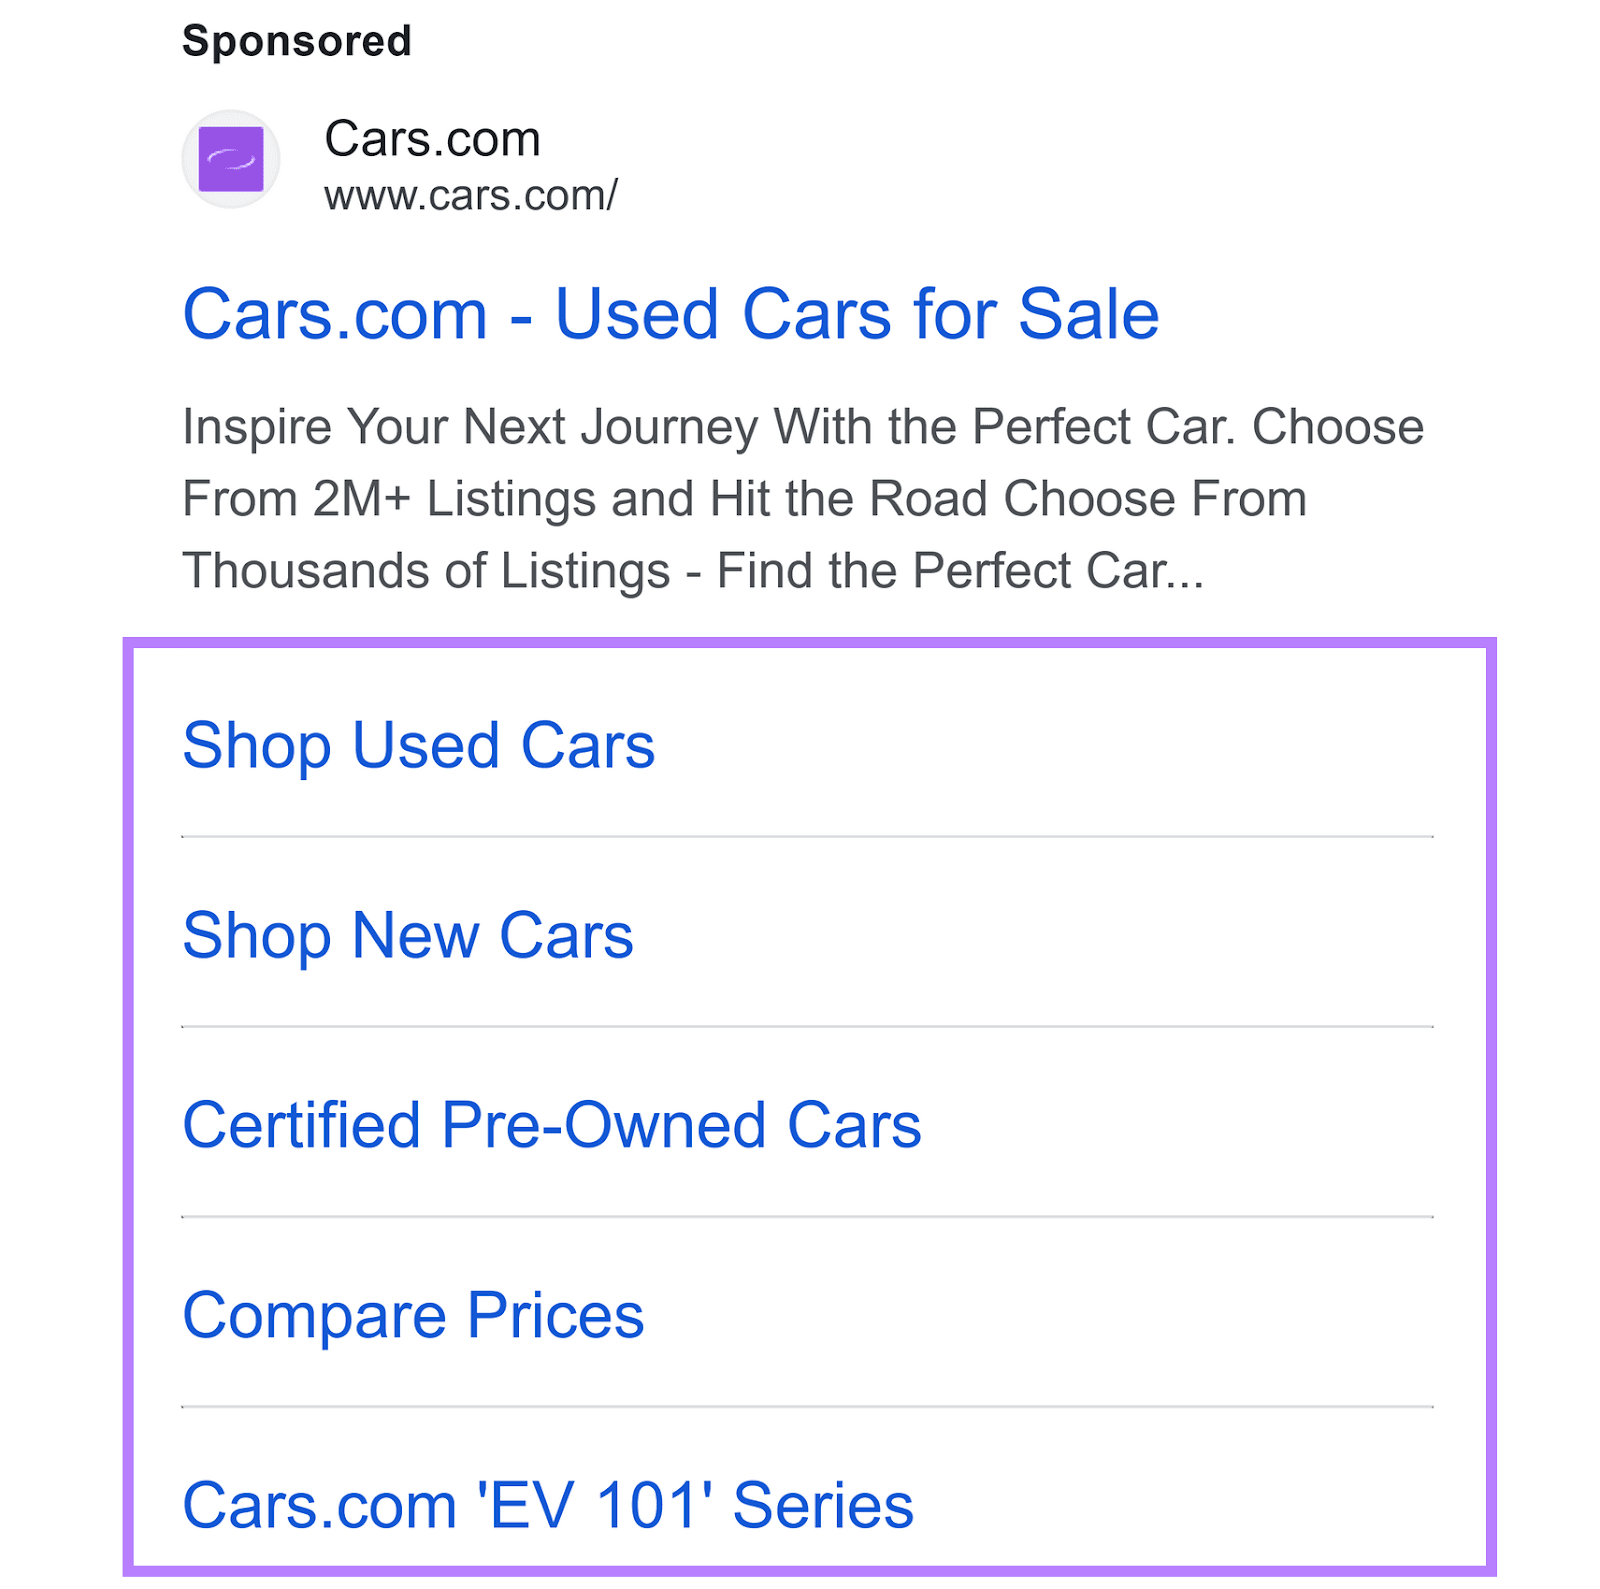 Cars.com' ad on Google SERP with multiple sitelink assets